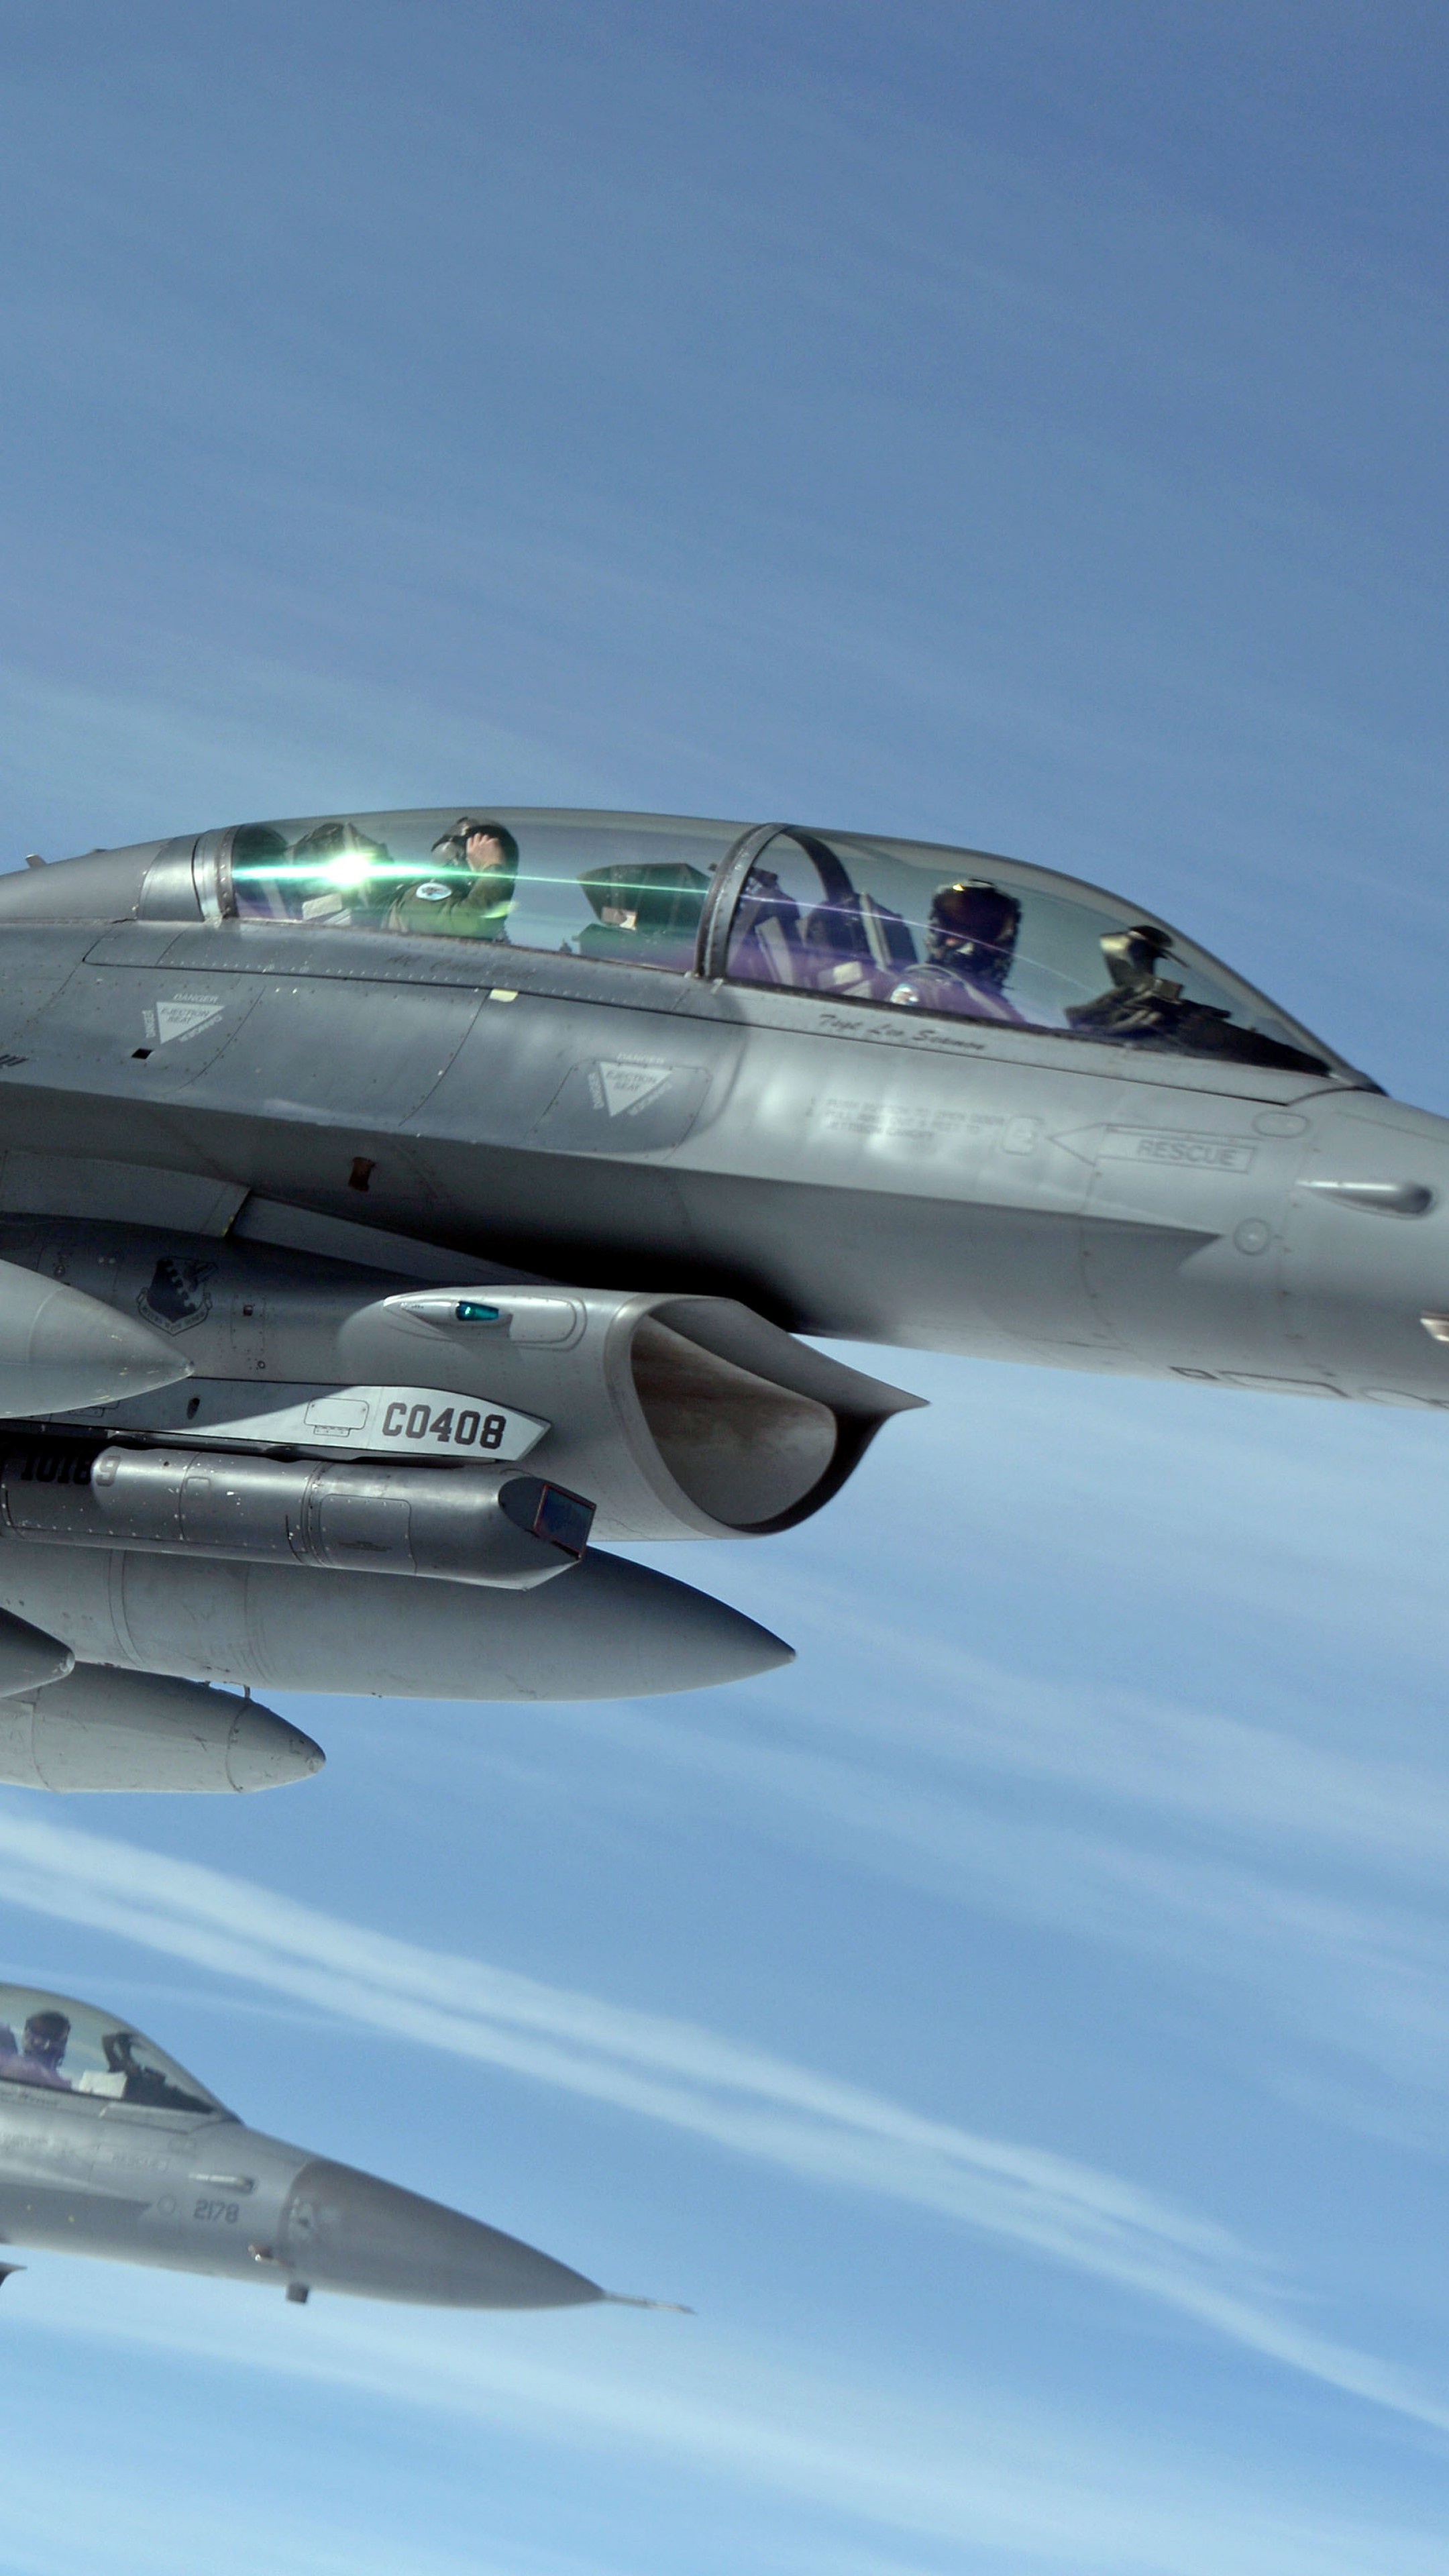 F-16 Fighting Falcon, US Army, US Air Force, 2160x3840 4K Handy